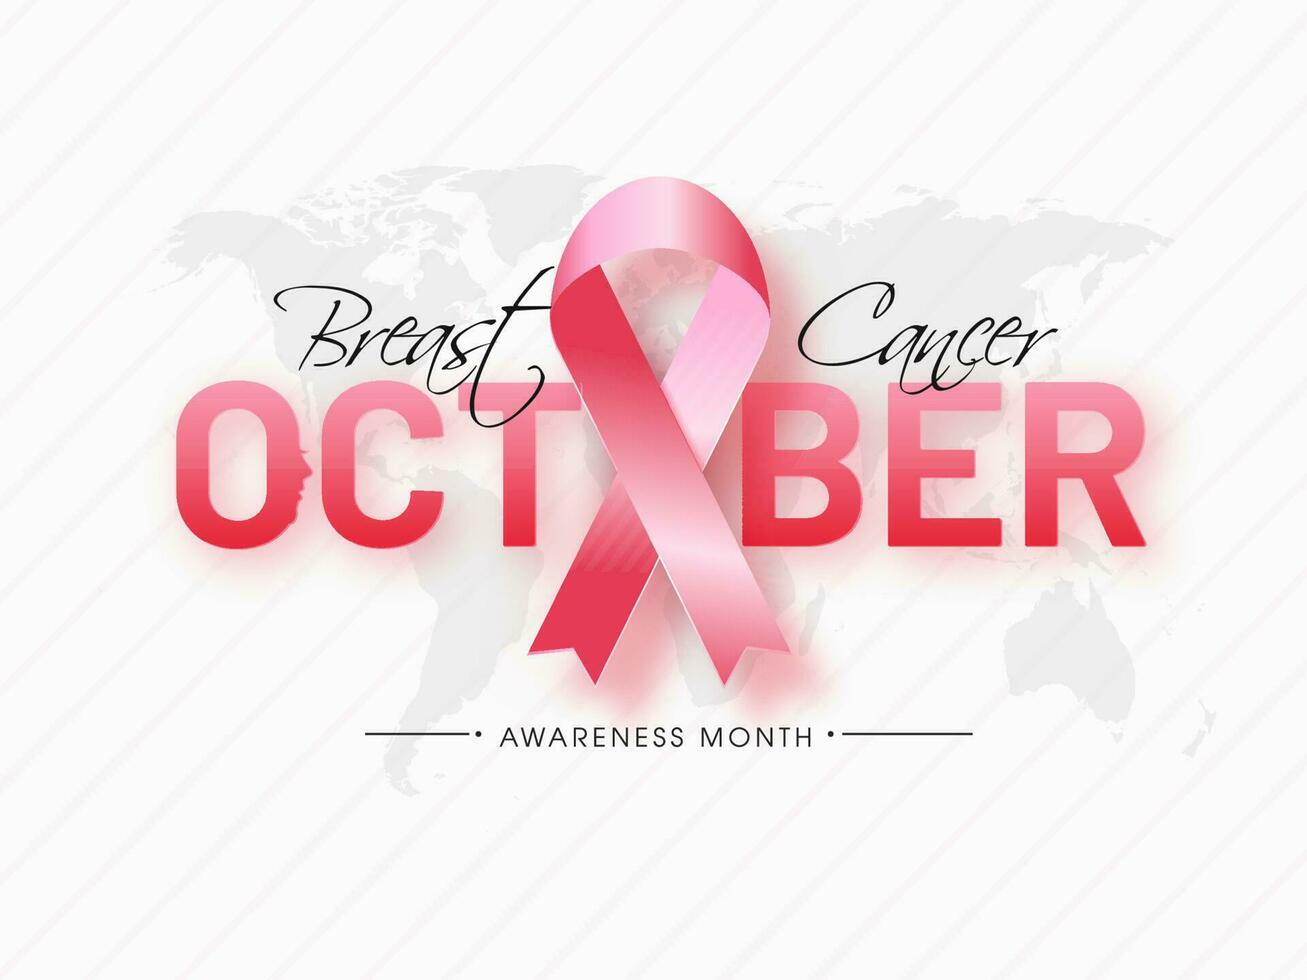 October text with pink ribbon on white world map striped background for Breast Cancer Awareness Month concept. vector